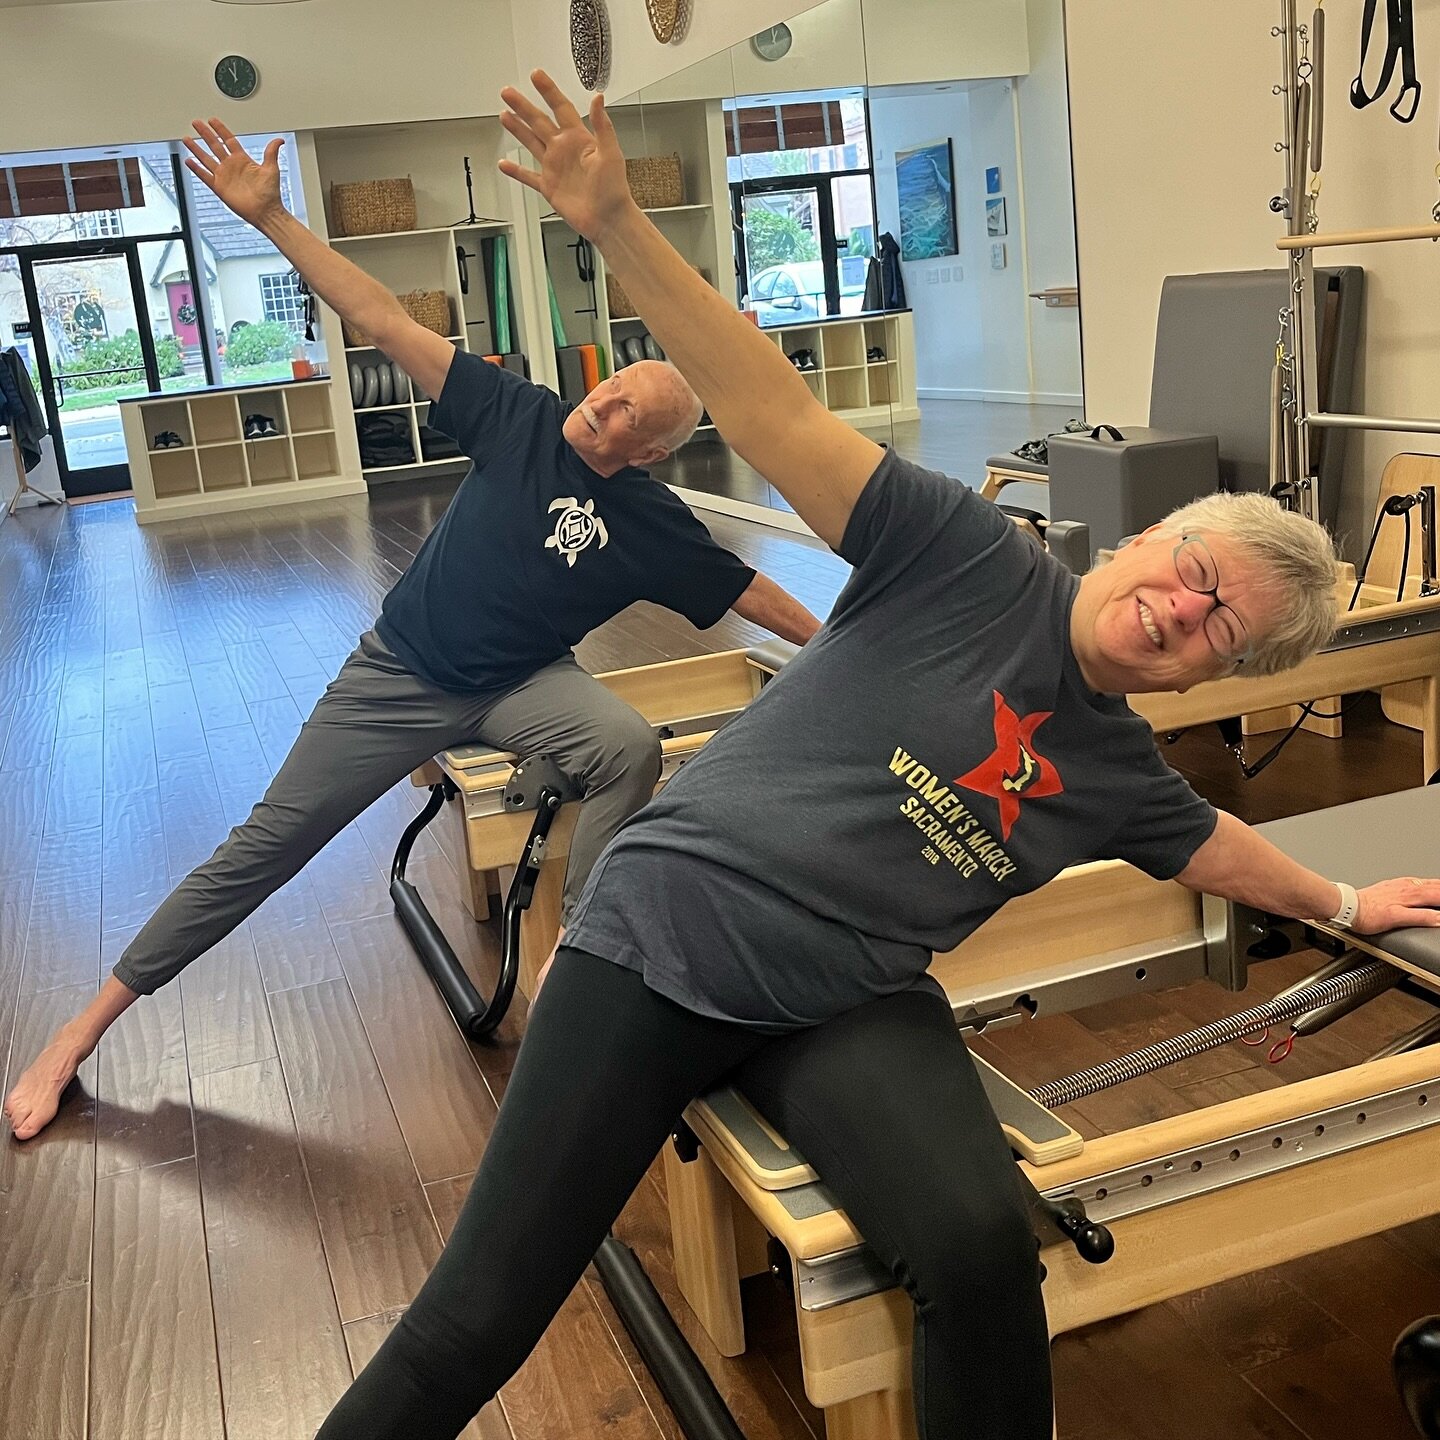 Nothing like a workout with a friend to keep the mood light and fun while you work on the serious business of keeping your body strong and fit. #pilatesforall #pilatesworkout #pilateswithfriends #smallgroupfitness #eastsacramento #eastsac #pilateslov